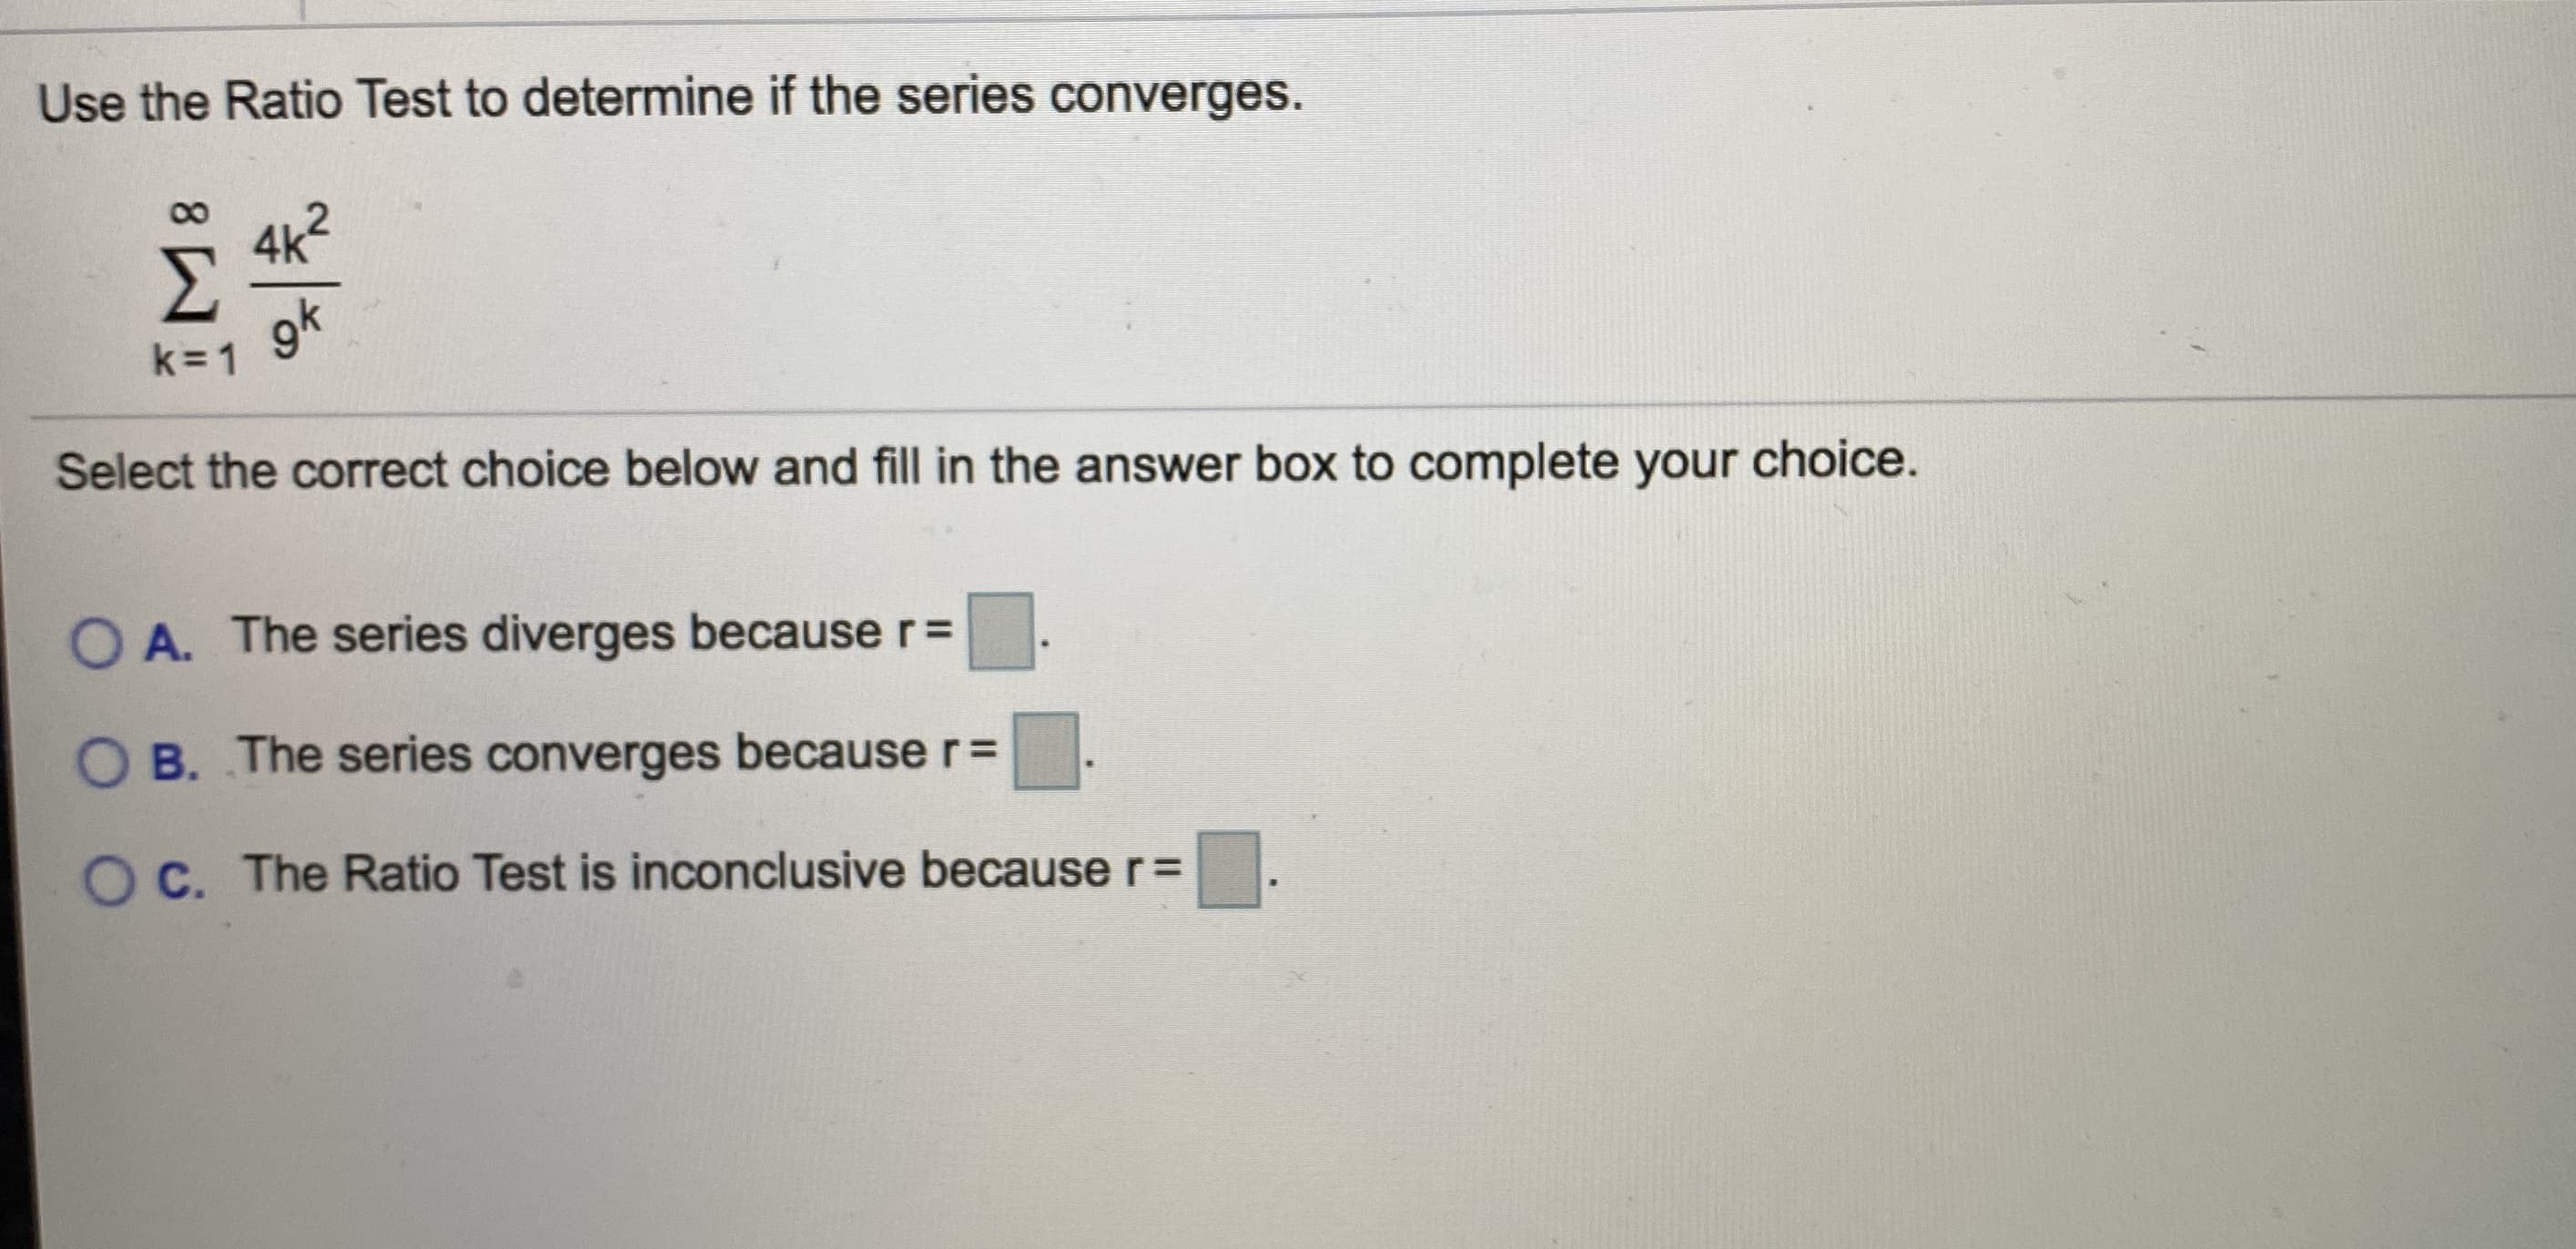 Use the Ratio Test to determine if the series converges.
4k2
Σ
gk
k=1
Select the correct choice below and fill in the answer box to complete your choice.
O A. The series diverges because r=
O B. The series converges because r=
O C. The Ratio Test is inconclusive because r=
